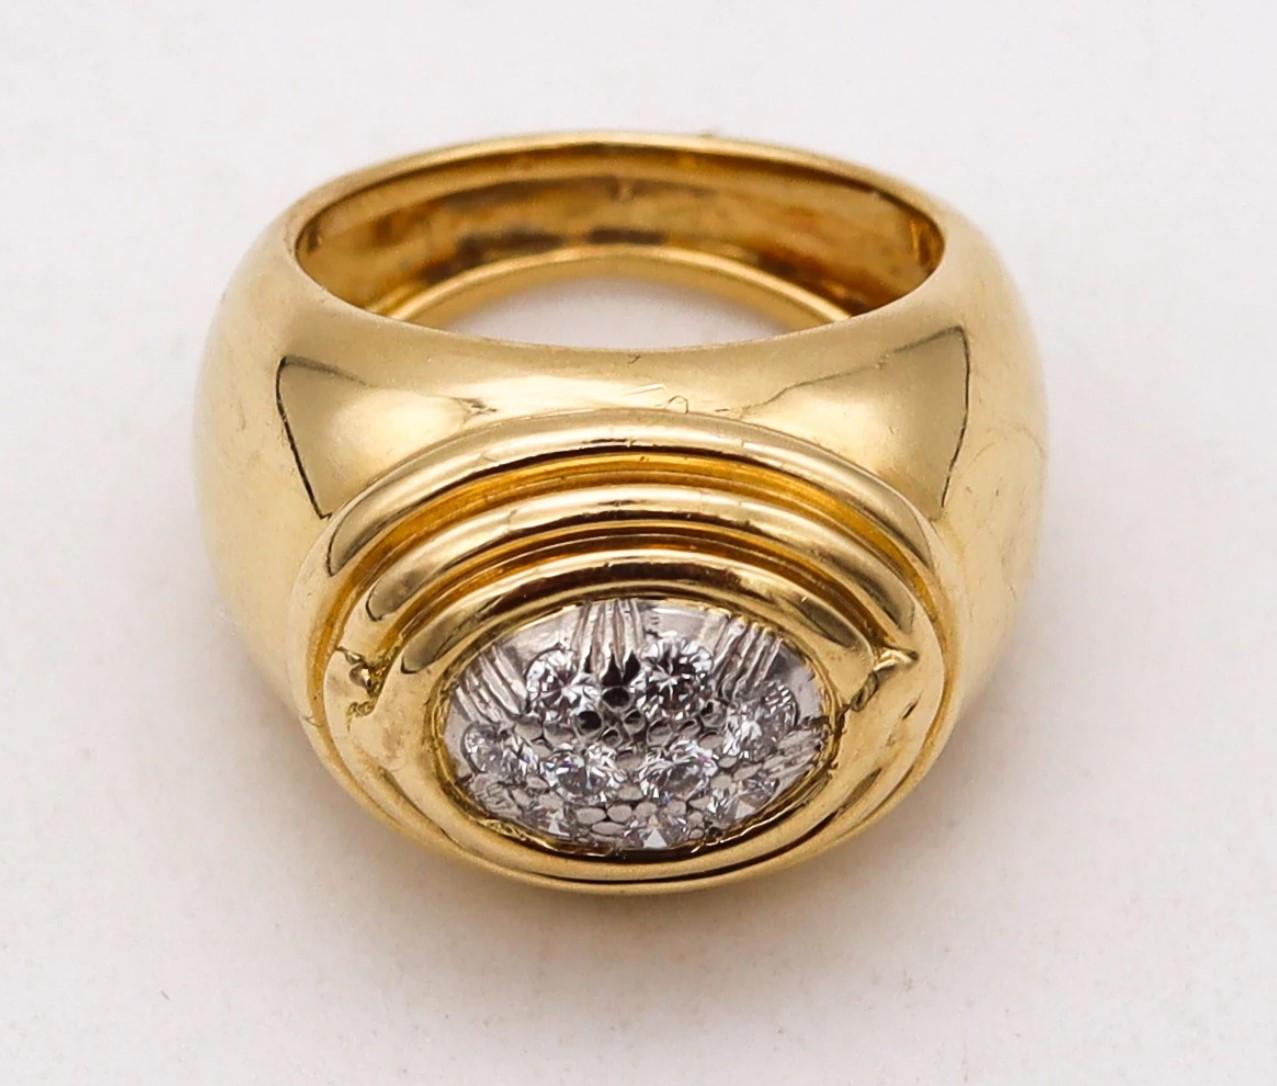 Modernist Tiffany & Co. 1970 Schlumberger Rare Ring in 18Kt Gold Platinum with VS Diamonds